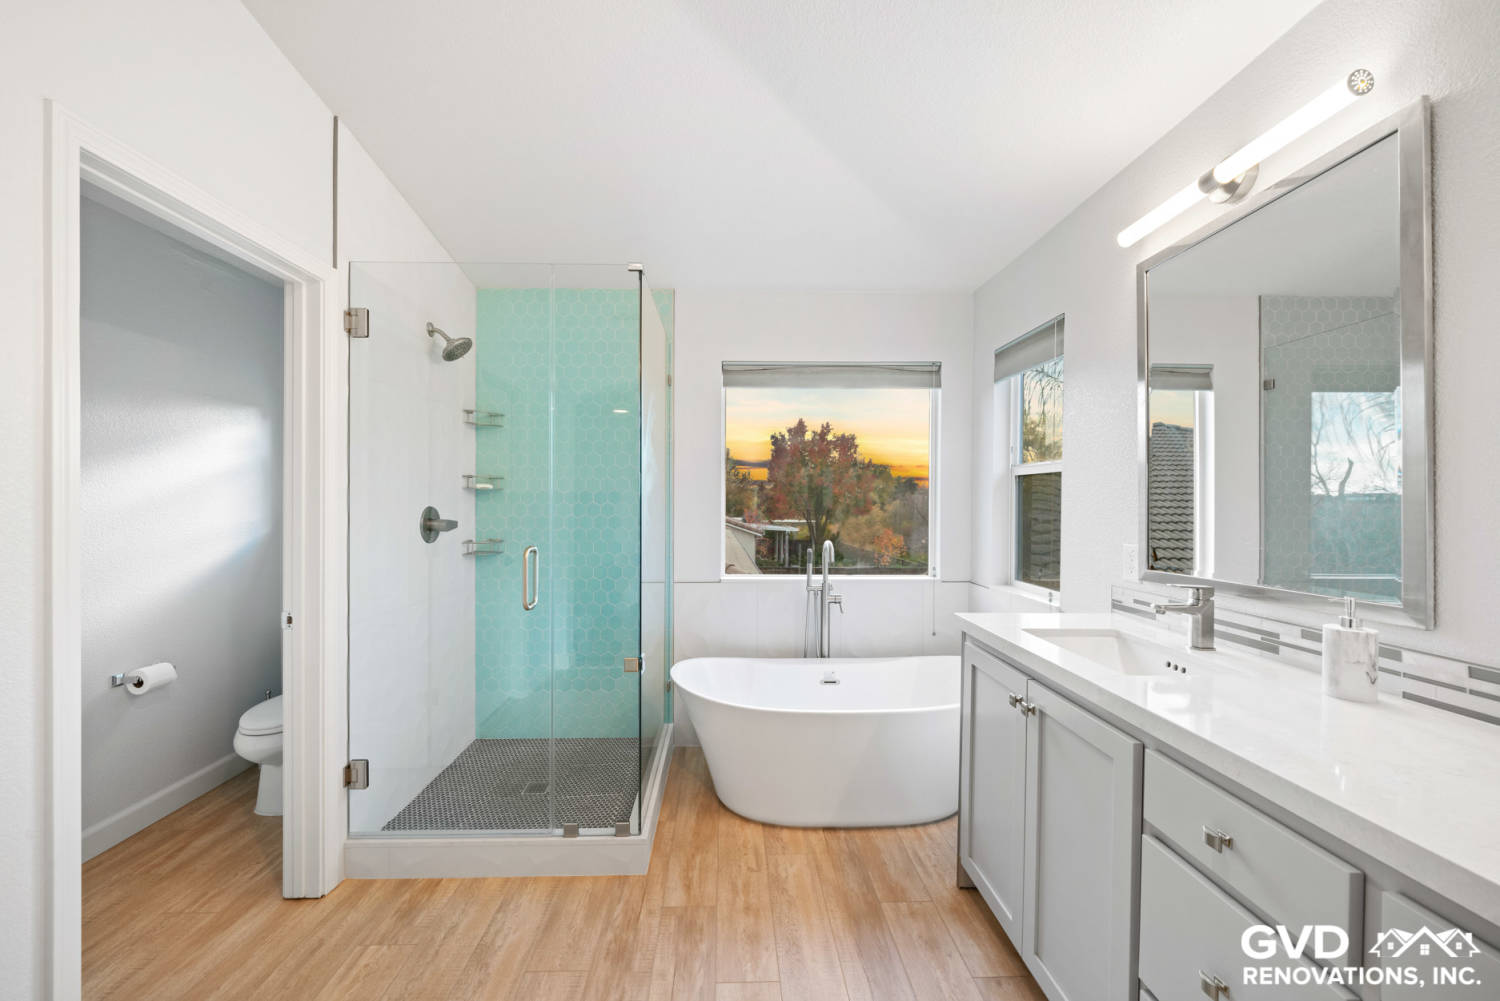 Average Cost Of A Bathroom Remodel, Can You Remodel A Bathroom For 2000